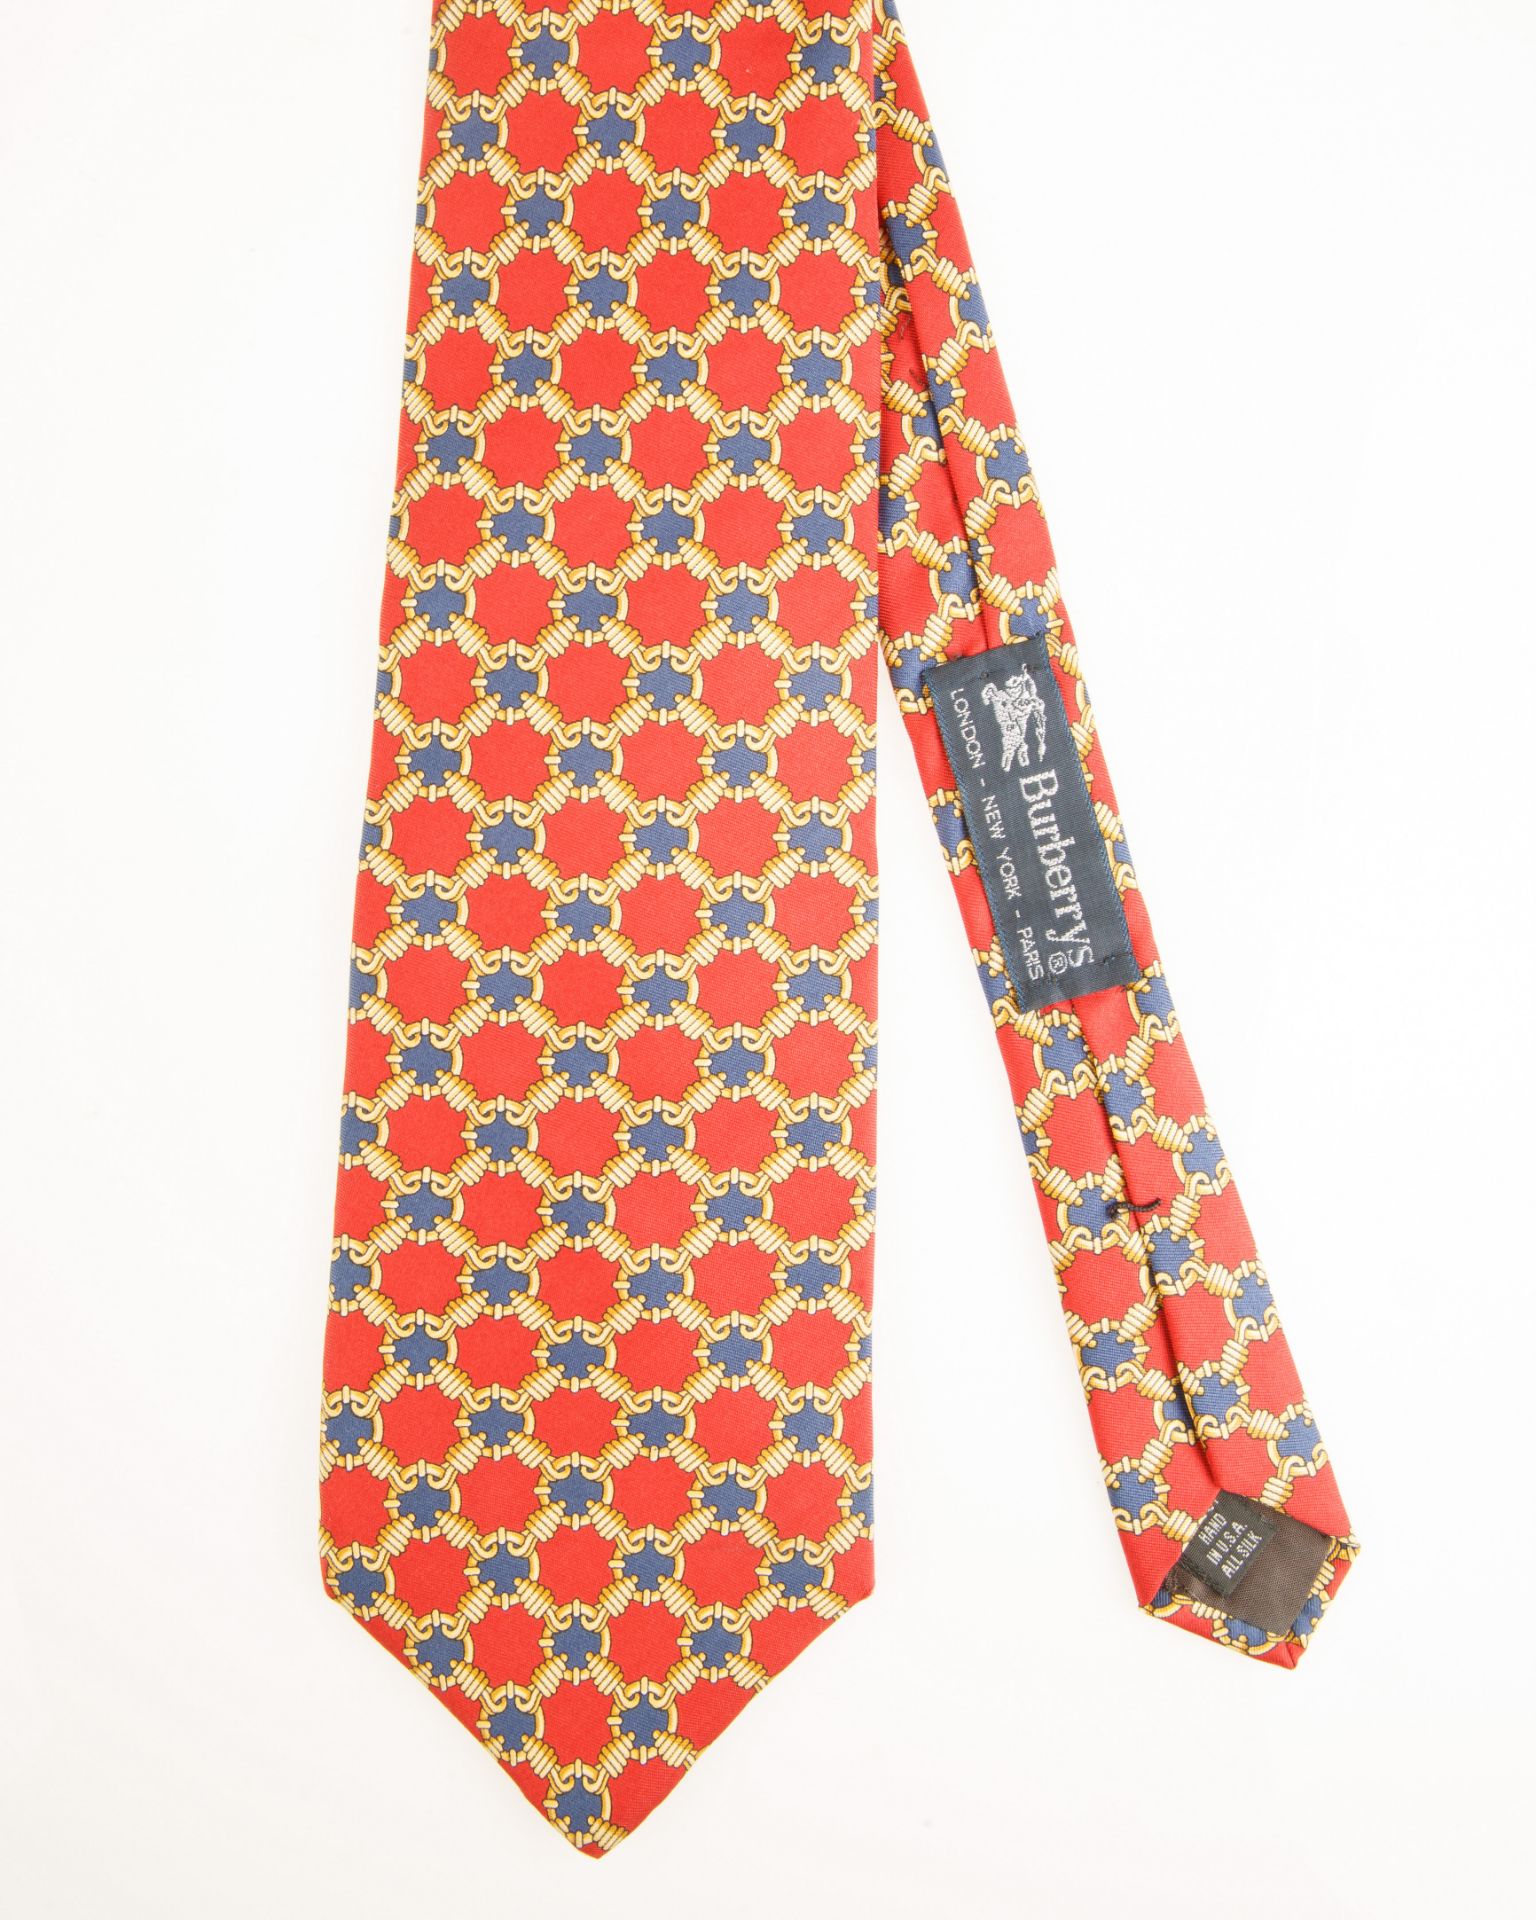 GROUP OF FIVE BURBERRY TIES - Image 6 of 11